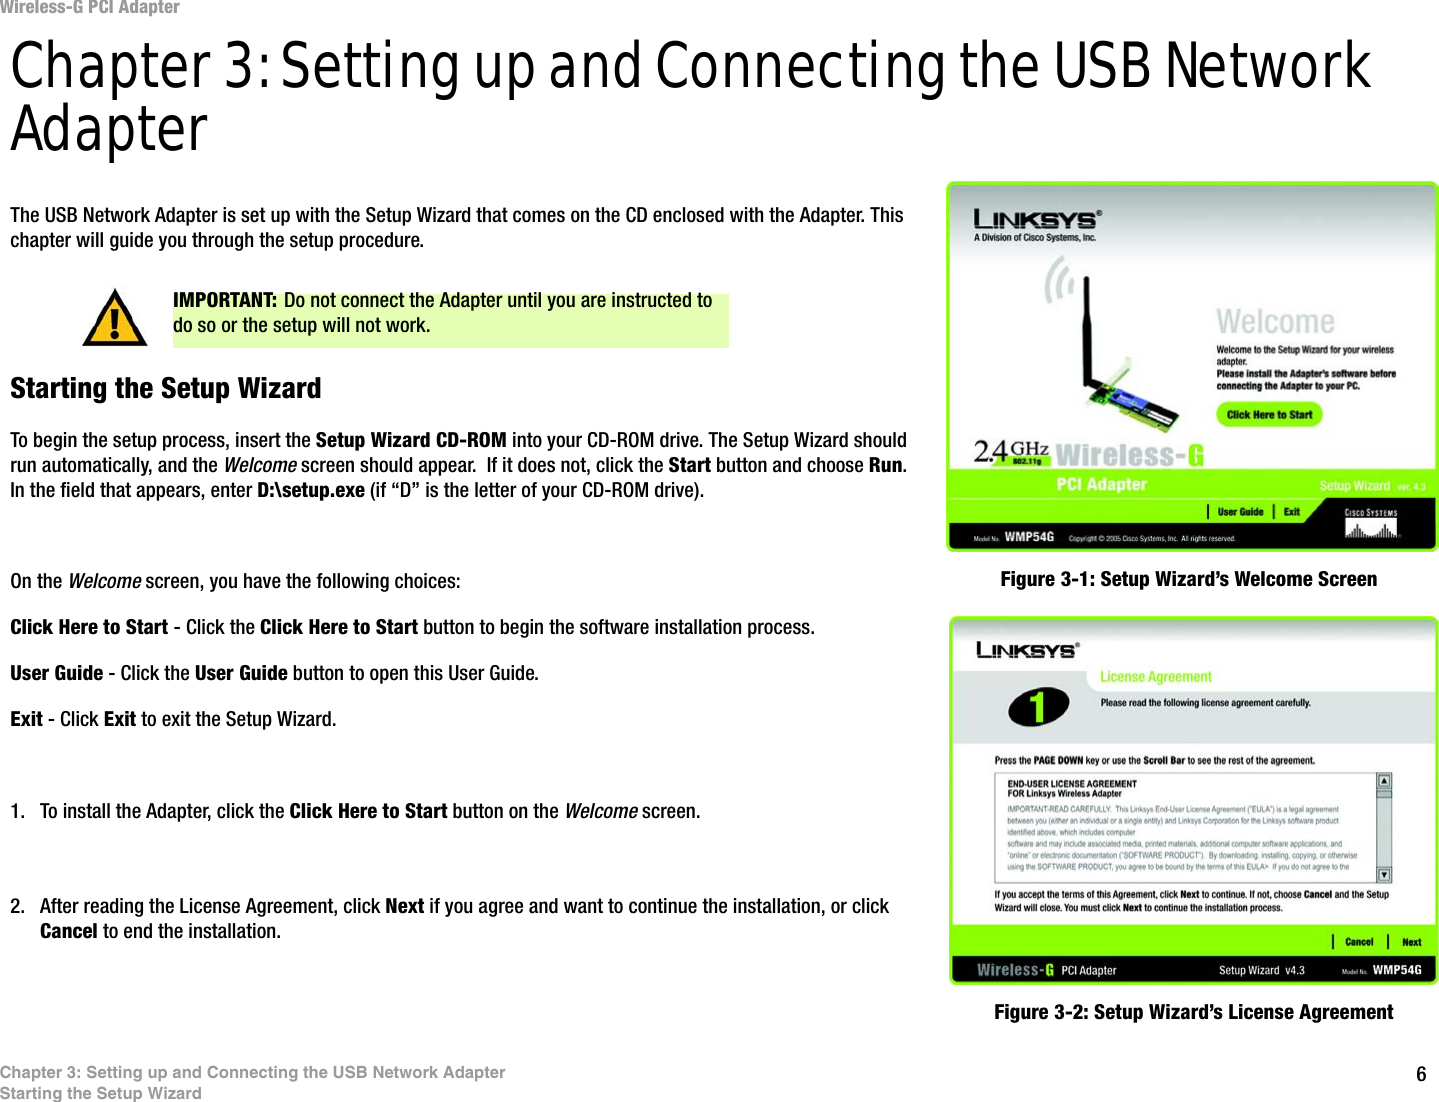 6Chapter 3: Setting up and Connecting the USB Network AdapterStarting the Setup WizardWireless-G PCI AdapterChapter 3: Setting up and Connecting the USB Network AdapterThe USB Network Adapter is set up with the Setup Wizard that comes on the CD enclosed with the Adapter. This chapter will guide you through the setup procedure. Starting the Setup WizardTo begin the setup process, insert the Setup Wizard CD-ROM into your CD-ROM drive. The Setup Wizard should run automatically, and the Welcome screen should appear.  If it does not, click the Start button and choose Run. In the field that appears, enter D:\setup.exe (if “D” is the letter of your CD-ROM drive). On the Welcome screen, you have the following choices:Click Here to Start - Click the Click Here to Start button to begin the software installation process. User Guide - Click the User Guide button to open this User Guide. Exit - Click Exit to exit the Setup Wizard.1. To install the Adapter, click the Click Here to Start button on the Welcome screen.2. After reading the License Agreement, click Next if you agree and want to continue the installation, or click Cancel to end the installation.Figure 3-1: Setup Wizard’s Welcome ScreenFigure 3-2: Setup Wizard’s License AgreementIMPORTANT: Do not connect the Adapter until you are instructed to do so or the setup will not work.